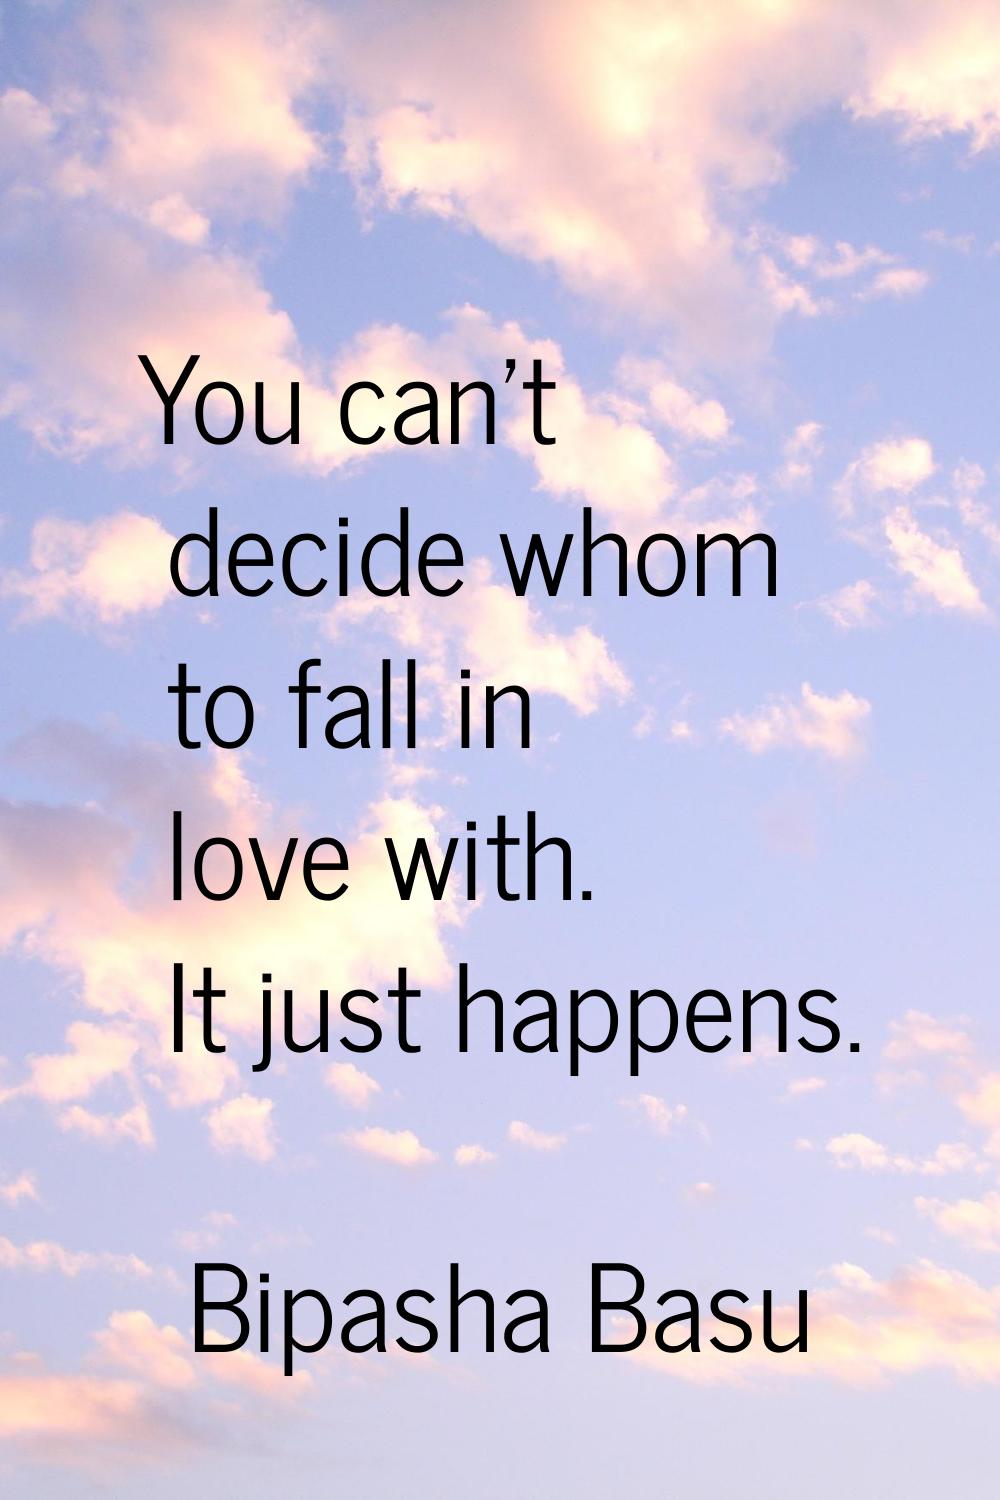 You can't decide whom to fall in love with. It just happens.